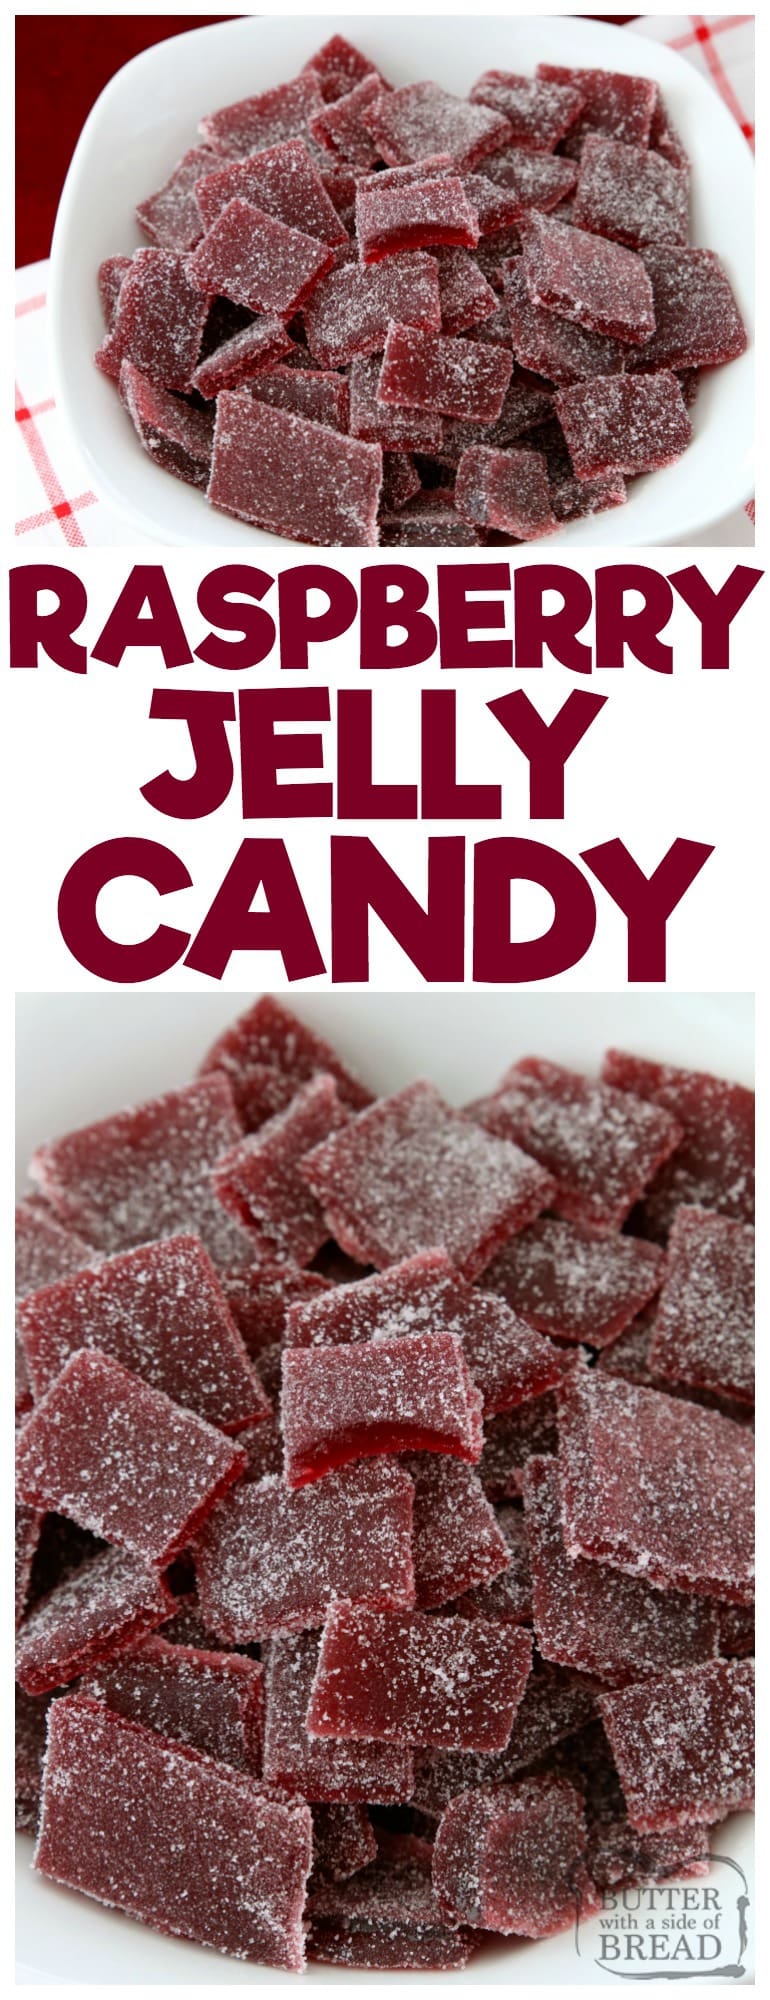 Raspberry Jelly Candy is soft, sweet candy with bright raspberry flavor. Just 5 ingredients & under 10 minutes active time, they're a lovely holiday treat! Easy #raspberry #candy recipe for #Christmas and other #holidays from Butter With A Side of Bread